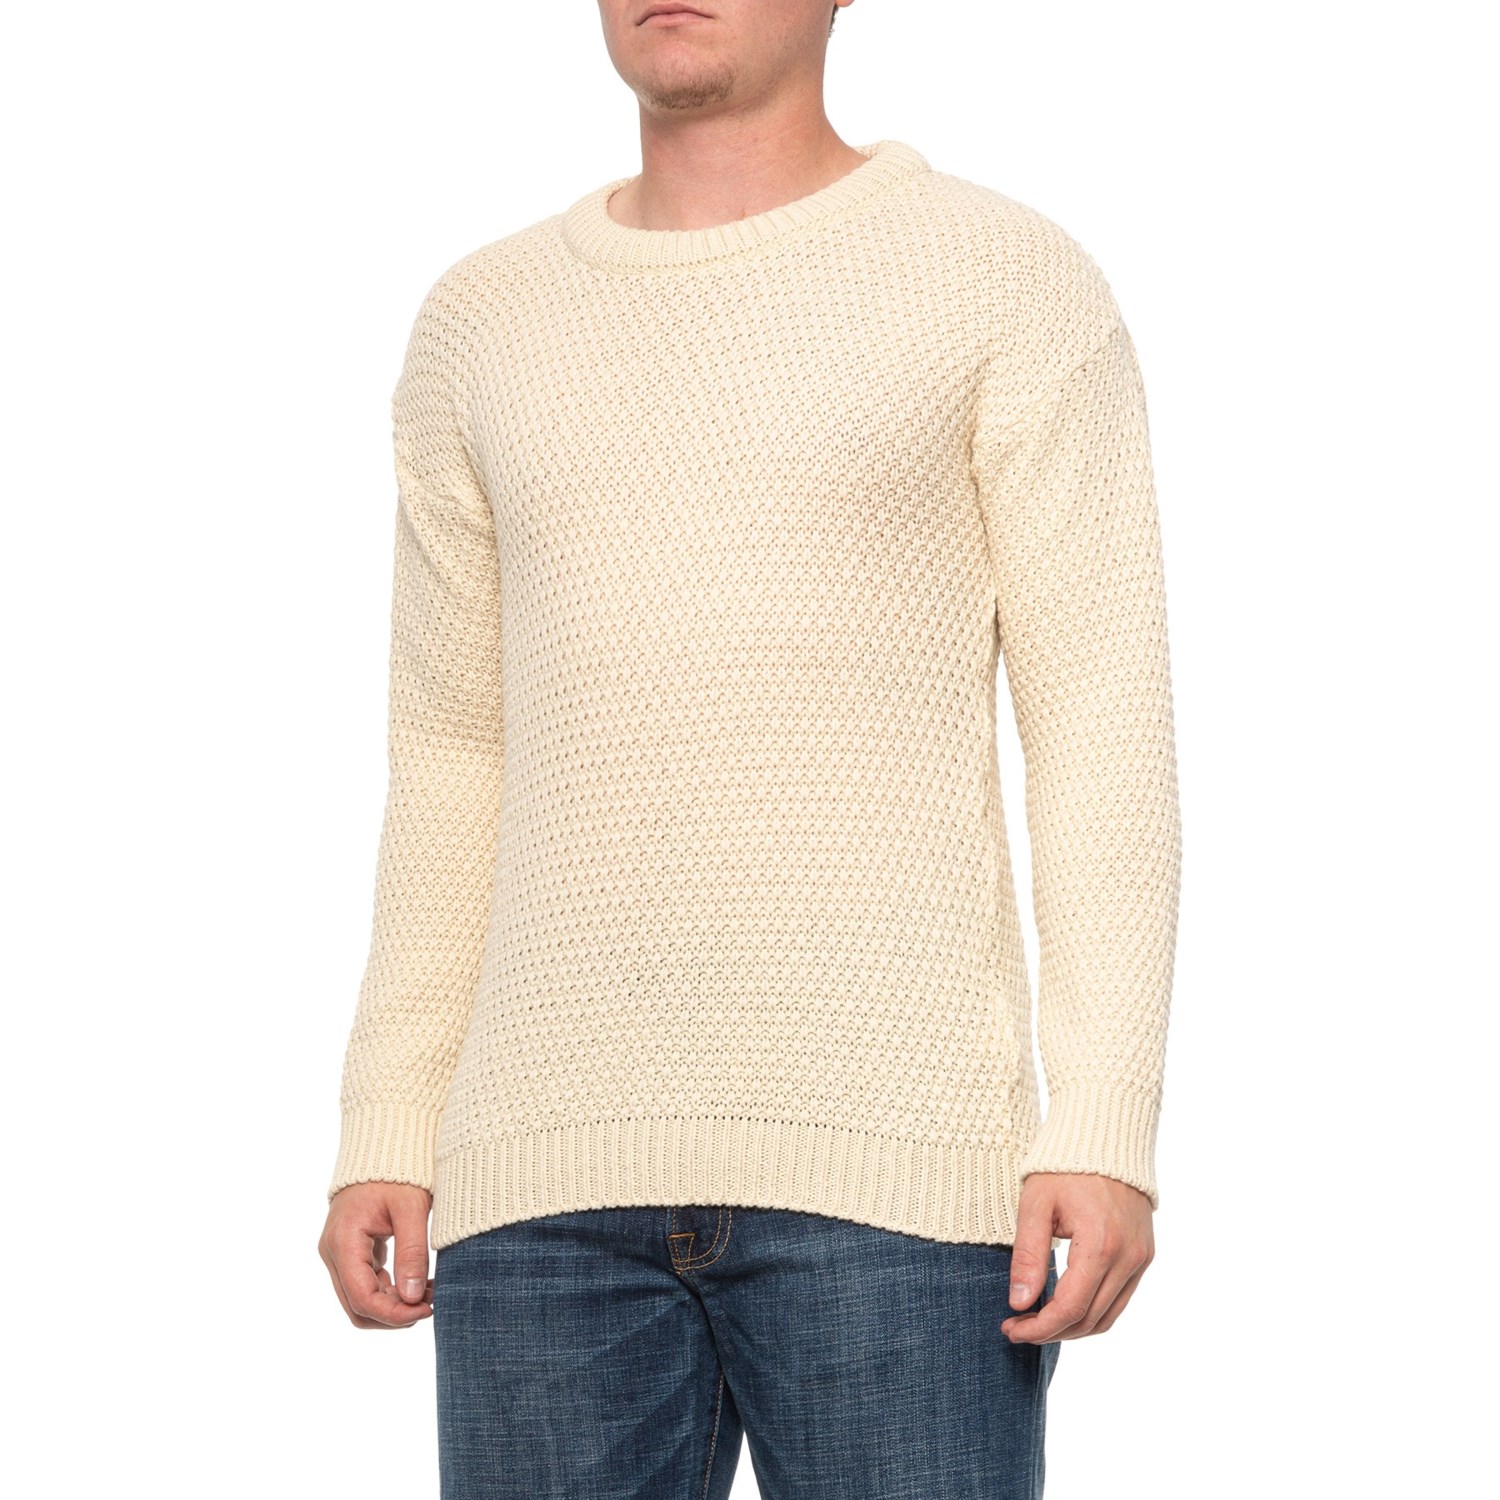 J.G. Glover & CO. Moss Stitch Sweater (For Men) - Save 72%